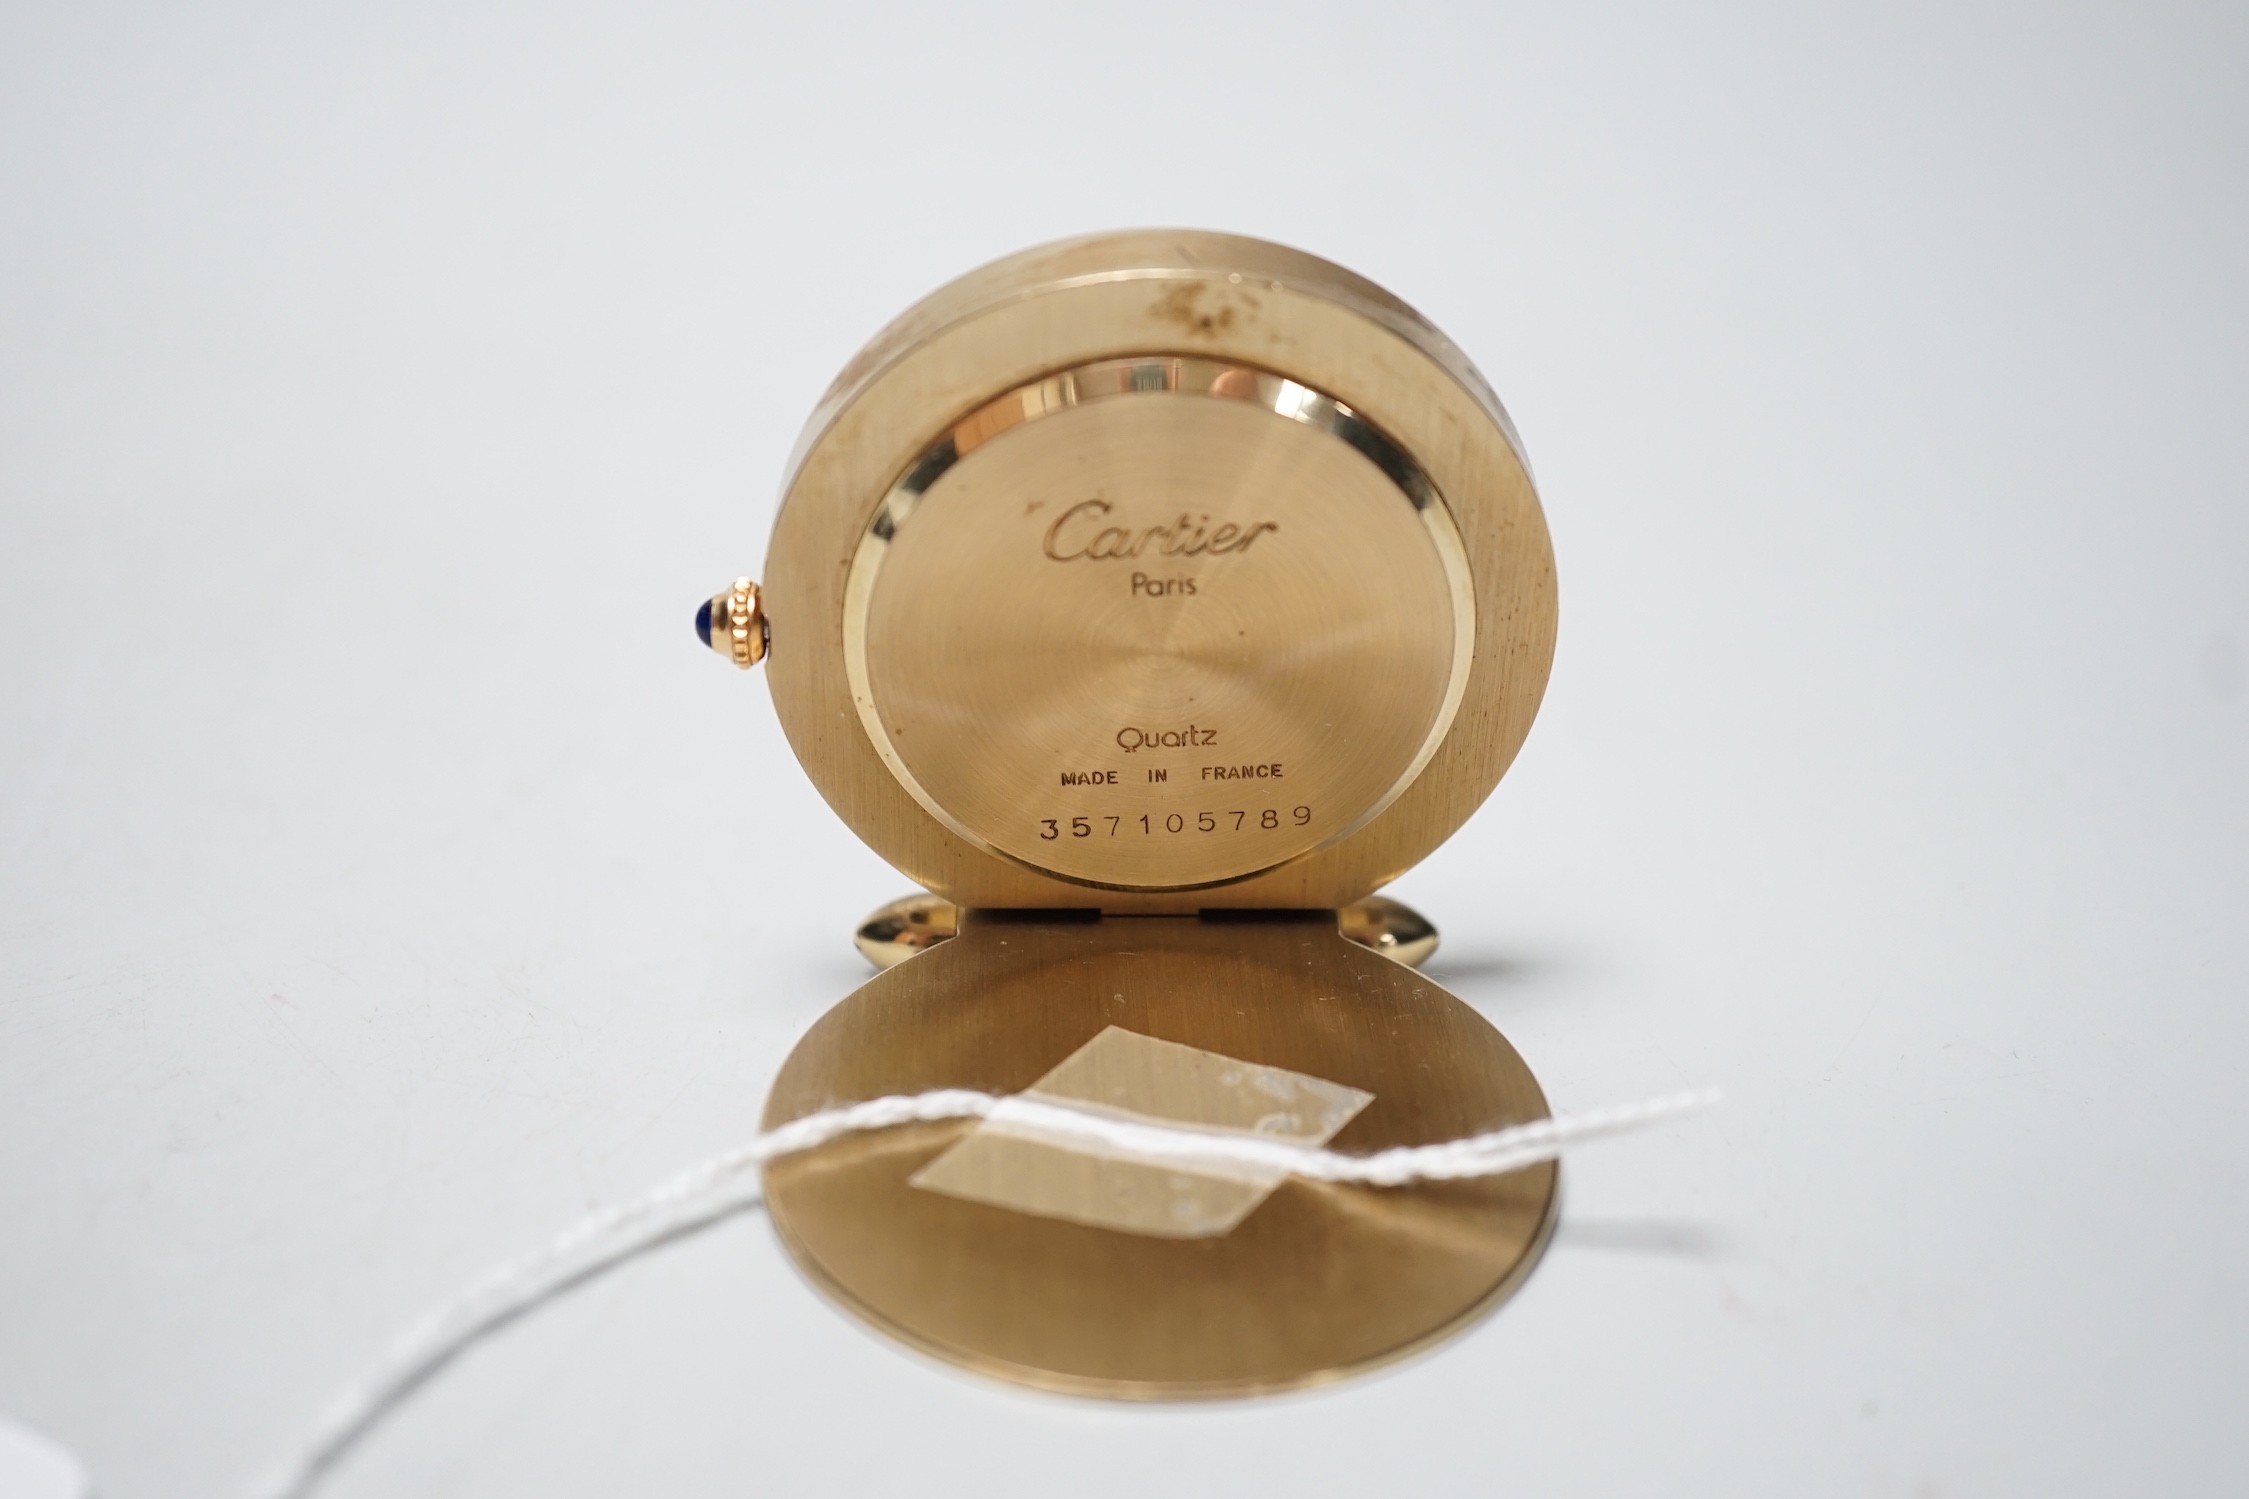 A Cartier travelling alarm timepiece, serial number 357105789